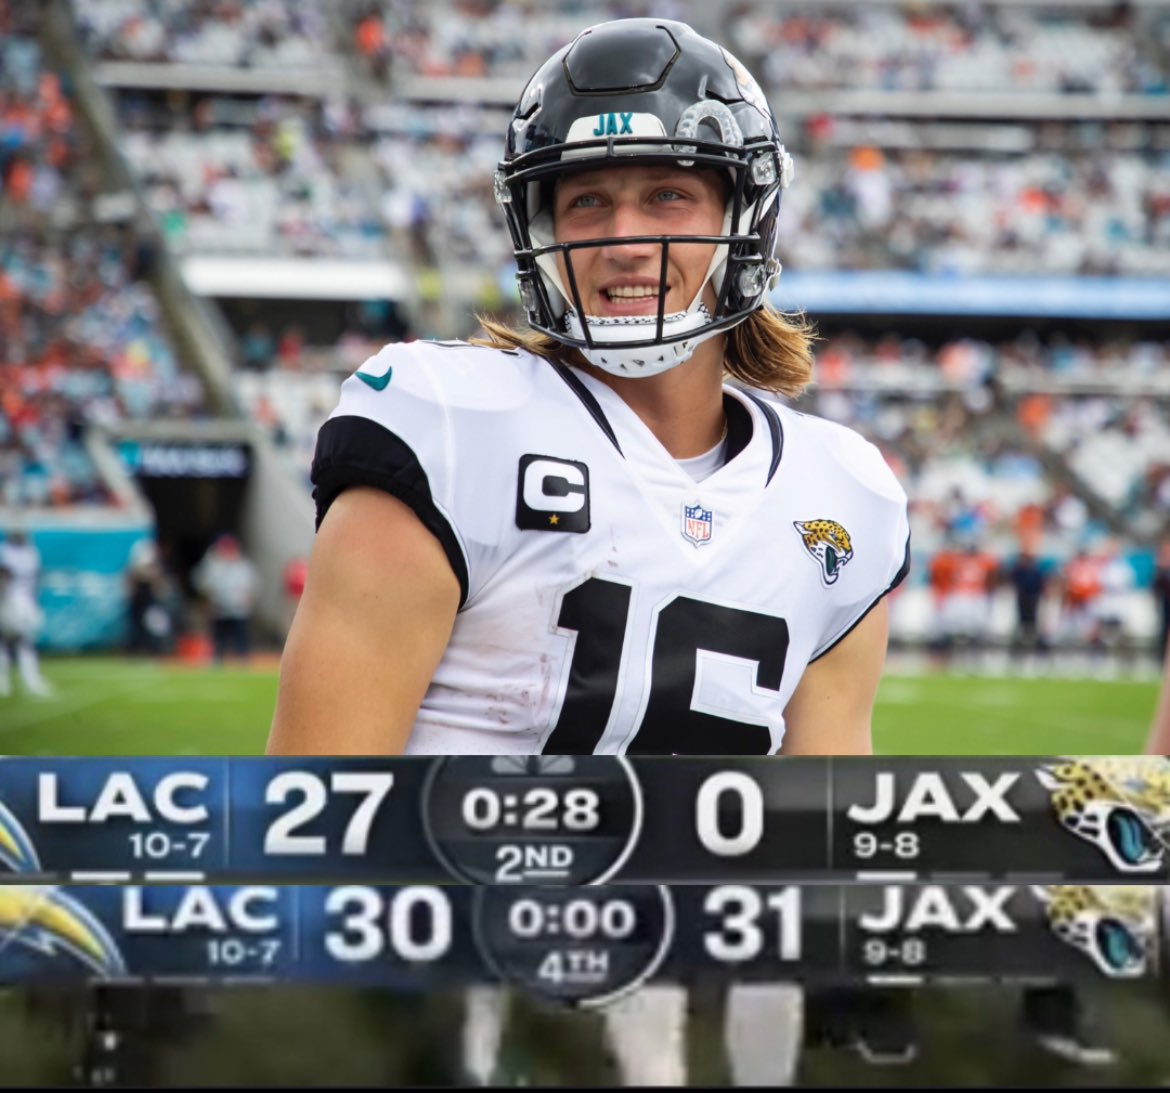 ClutchPoints Betting on X: 'The Jaguars come back from down 27-0 to stun  the the Chargers 